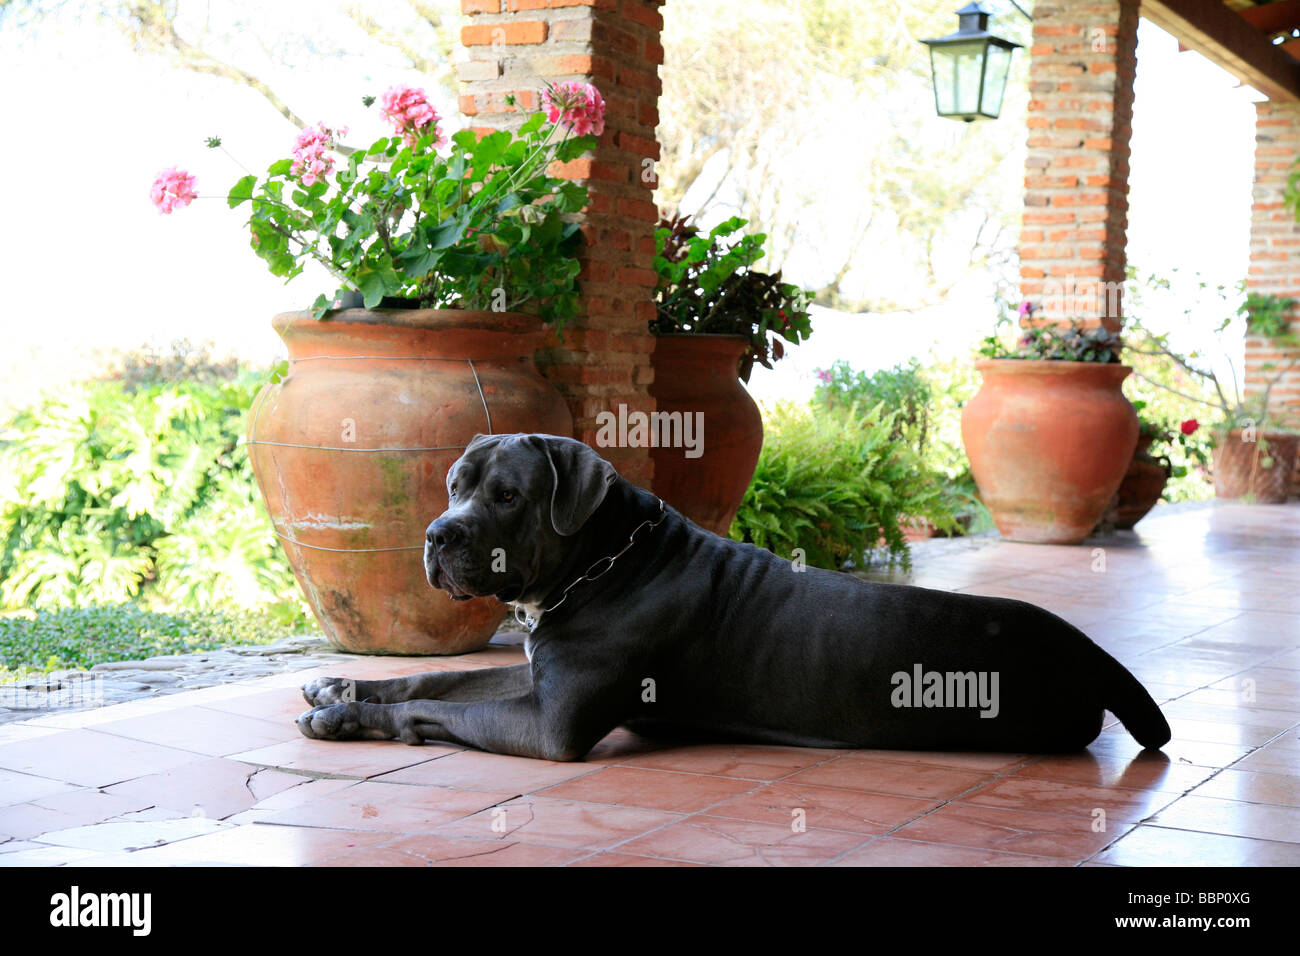 male cane corso adult italian antique breed dog used for work defense  Hunting loyal  obedient to owner strong healthy rustic Stock Photo